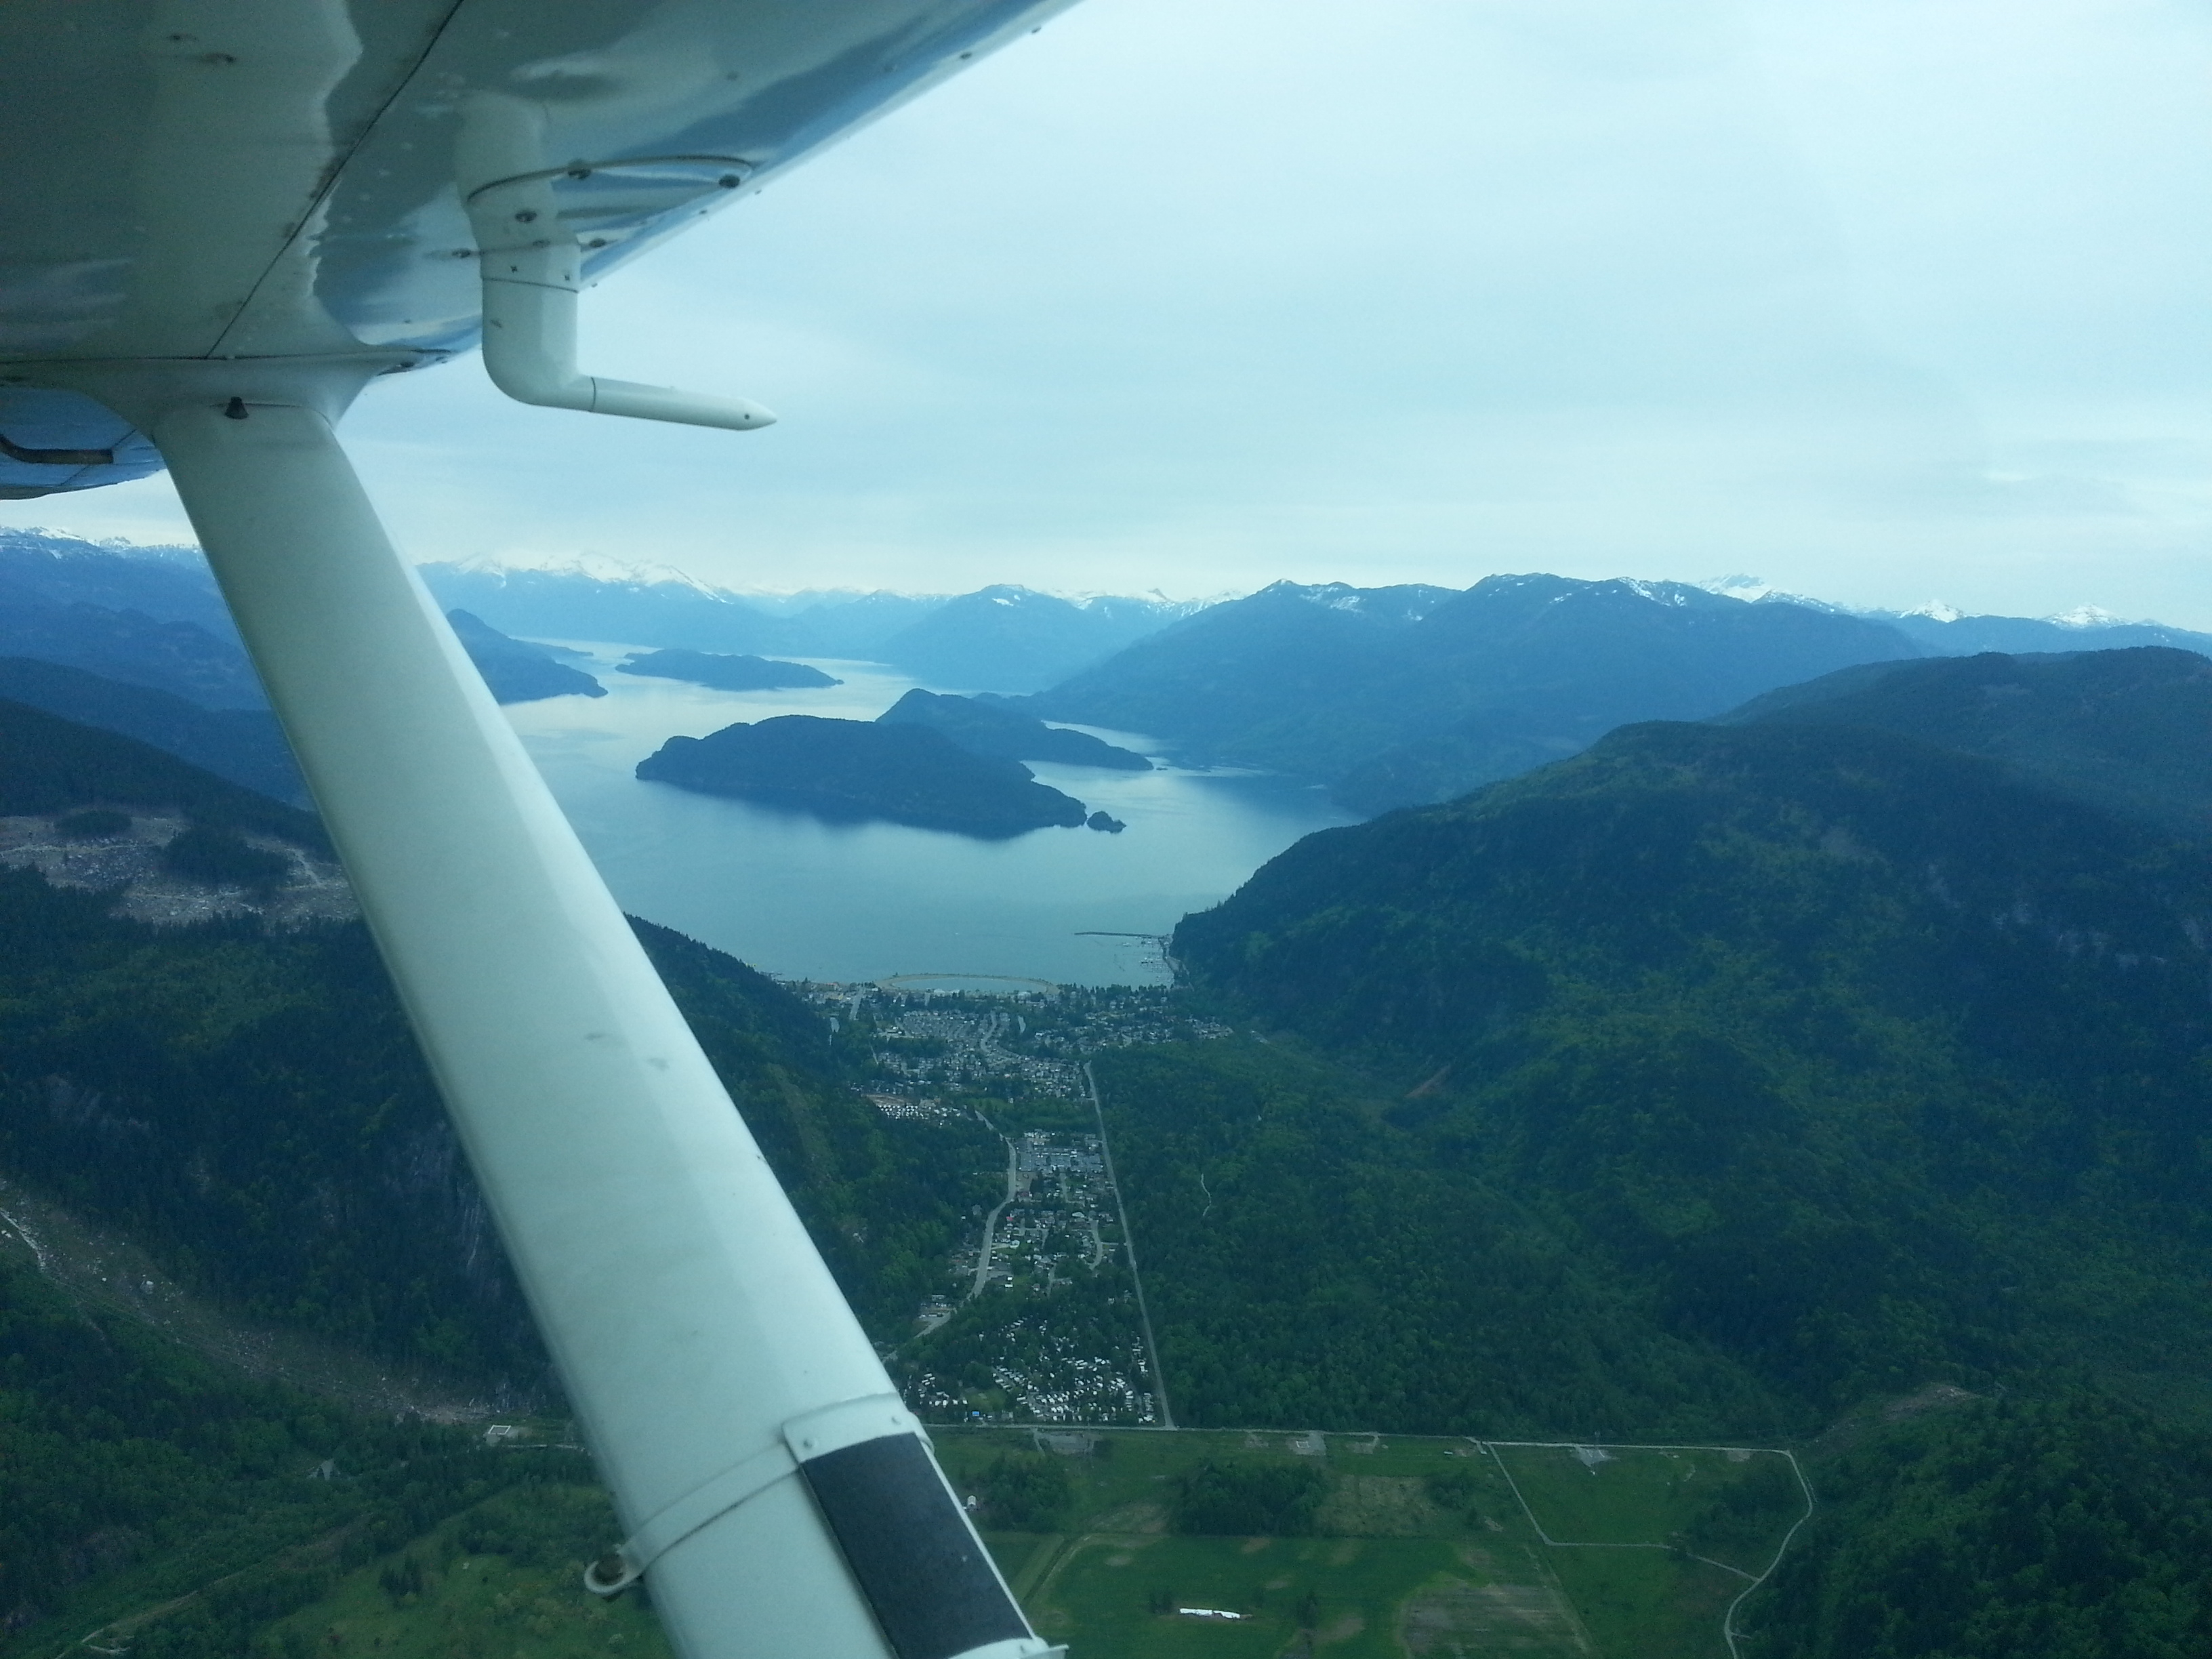 Looking north over Harrison Hot Springs and Echo Island